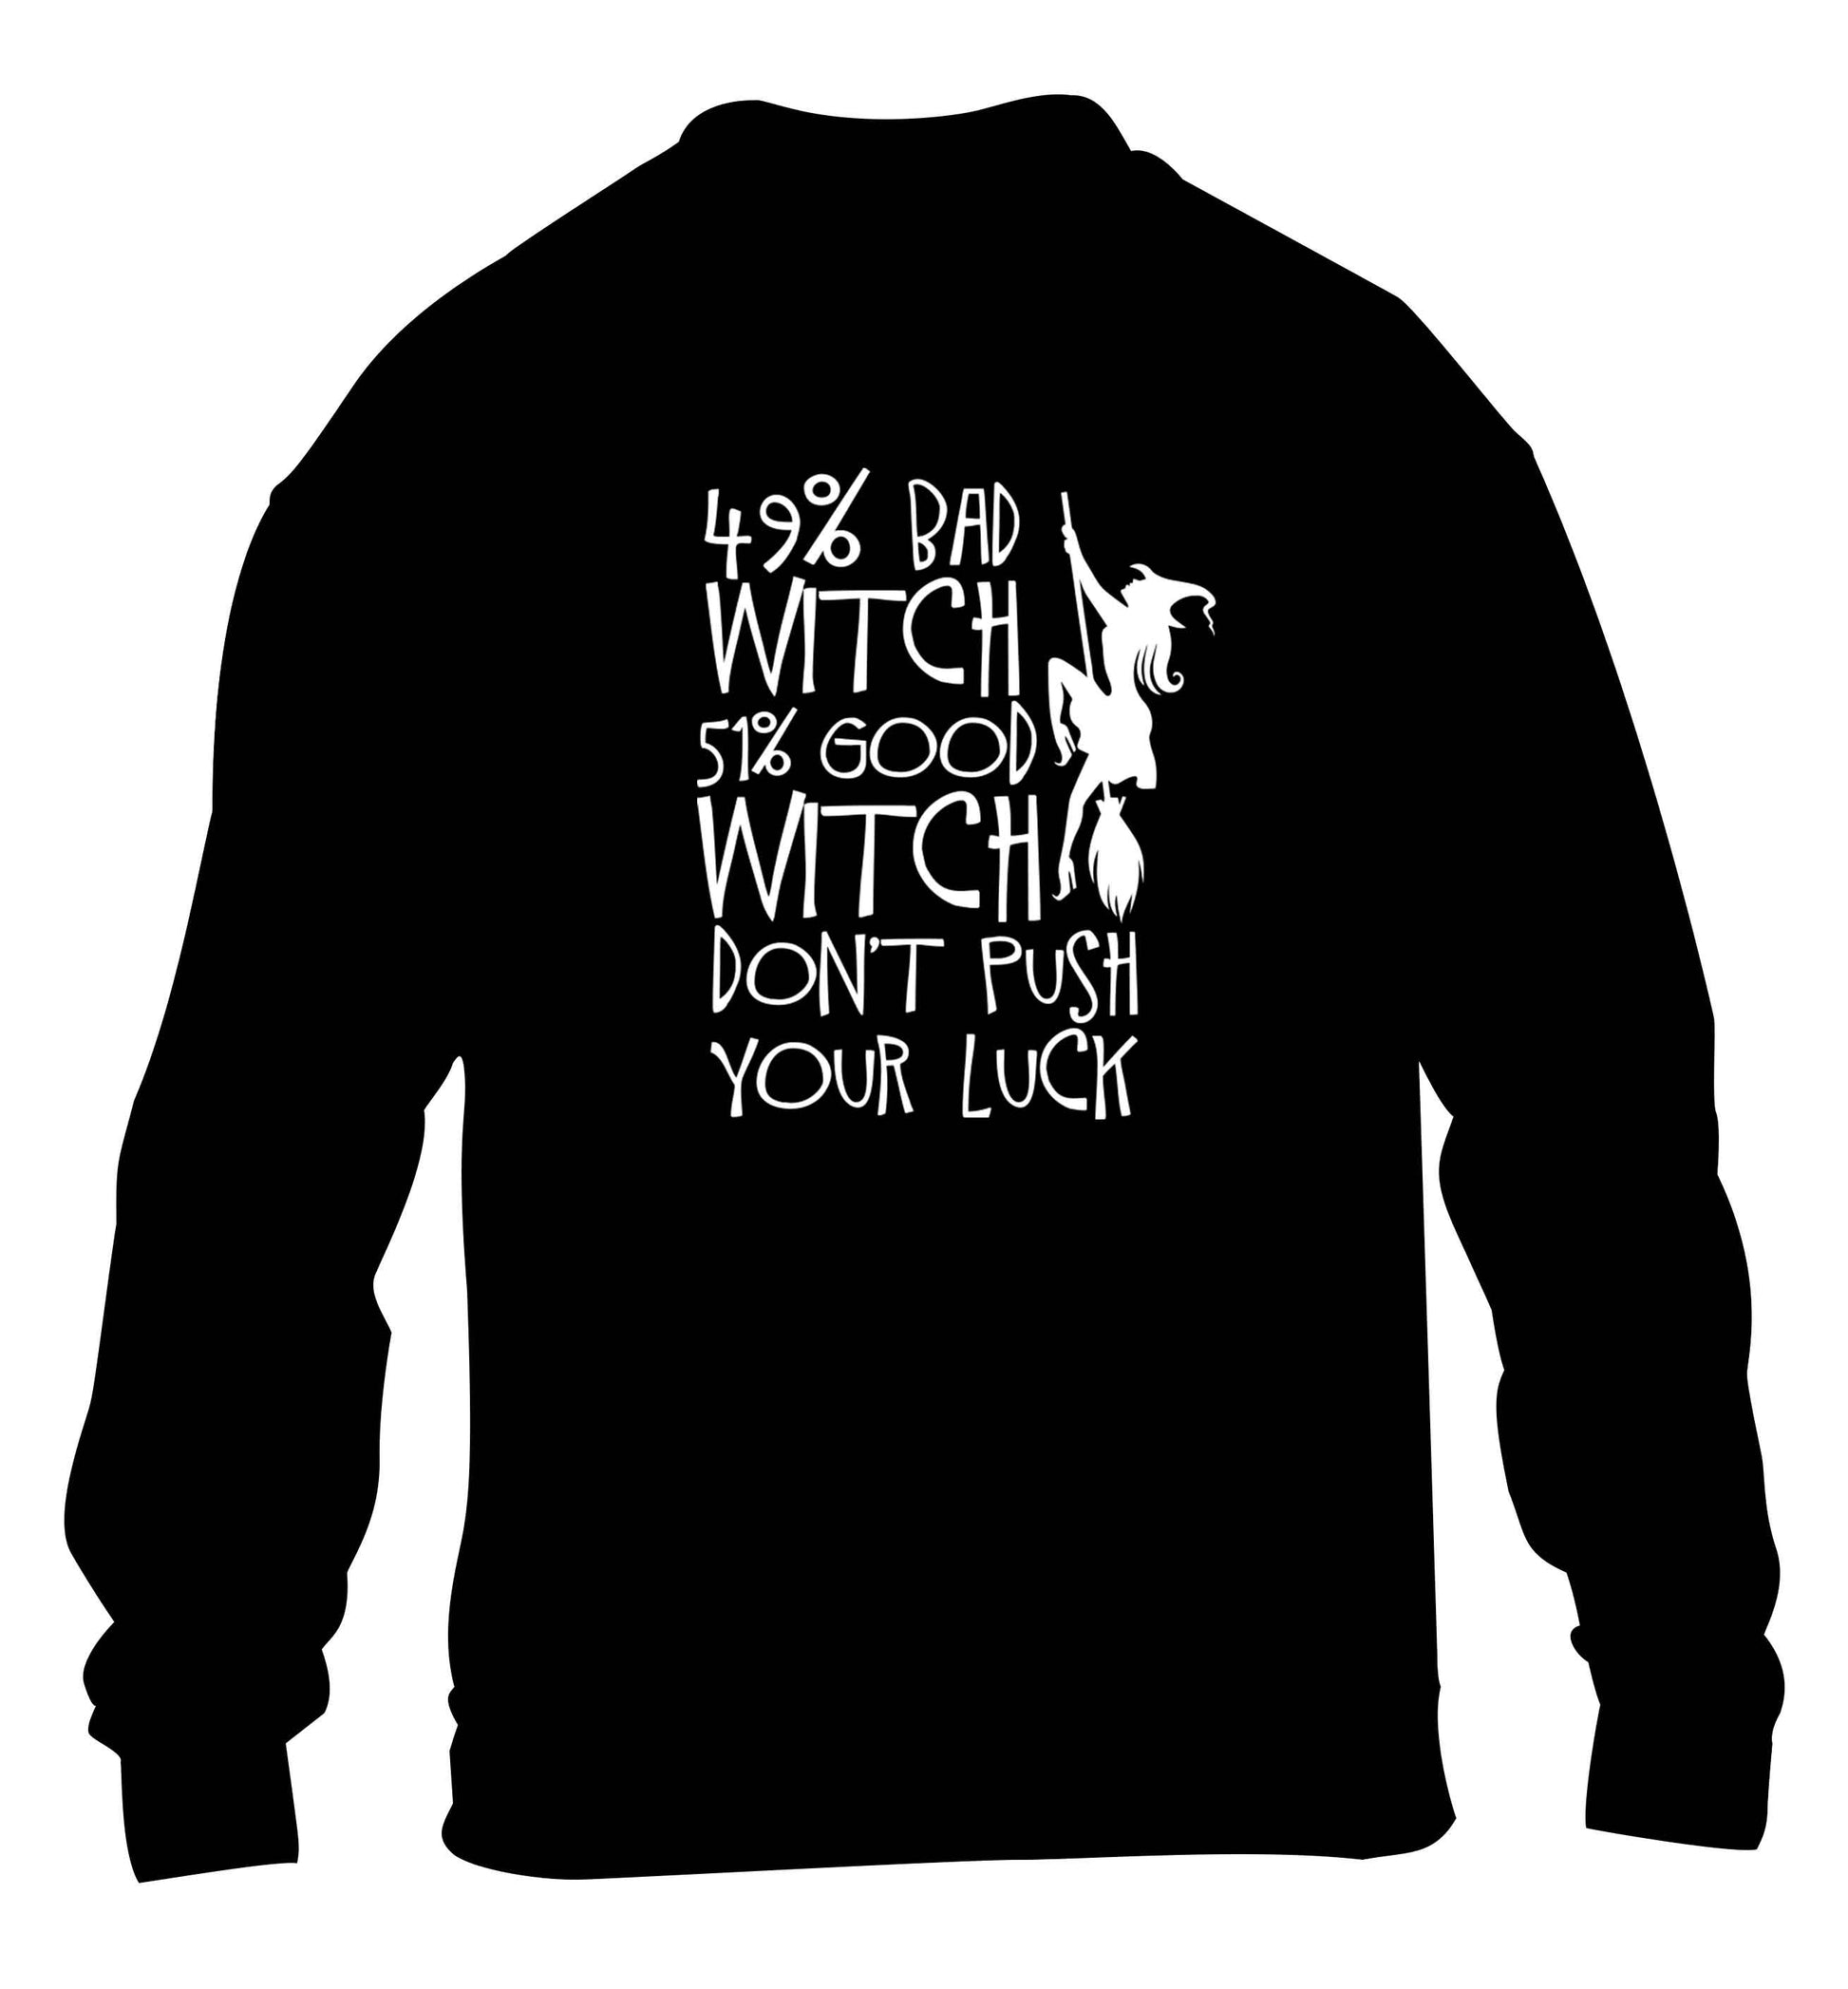 49% bad witch 51% good witch don't push your luck children's black sweater 12-13 Years